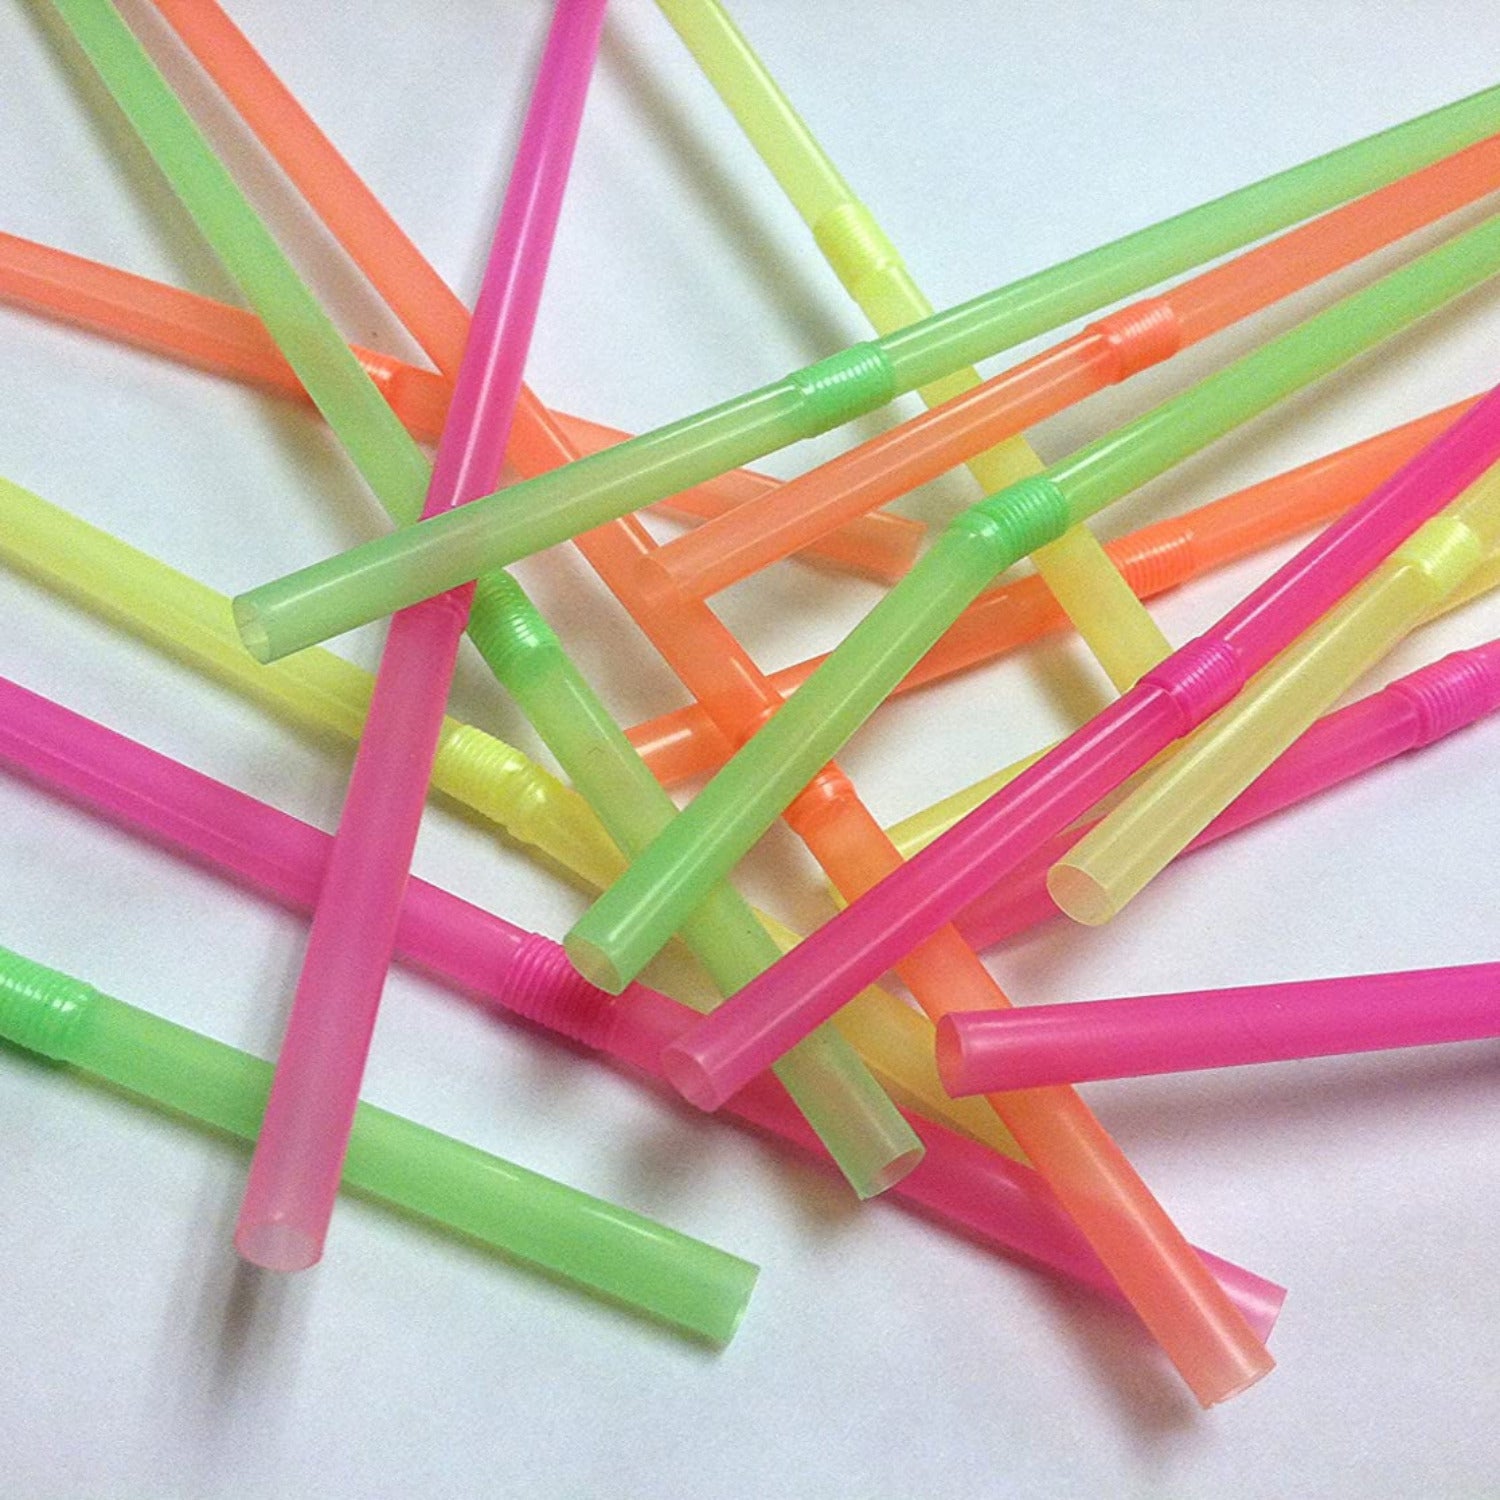 Kolorae 5in Small Straws 200 Count